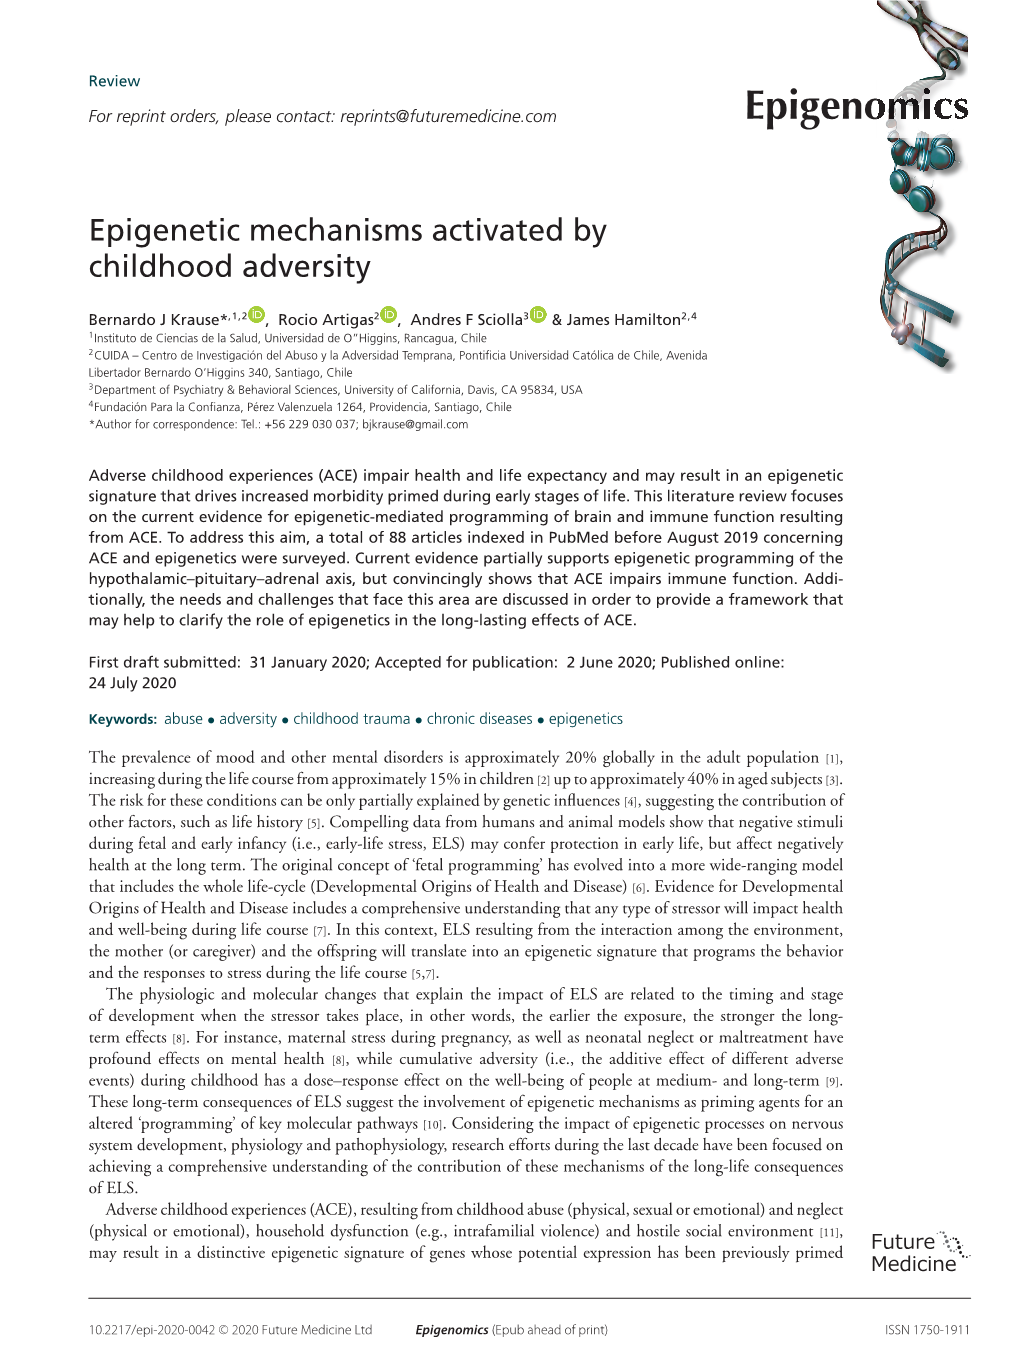 Epigenetic Mechanisms Activated by Childhood Adversity